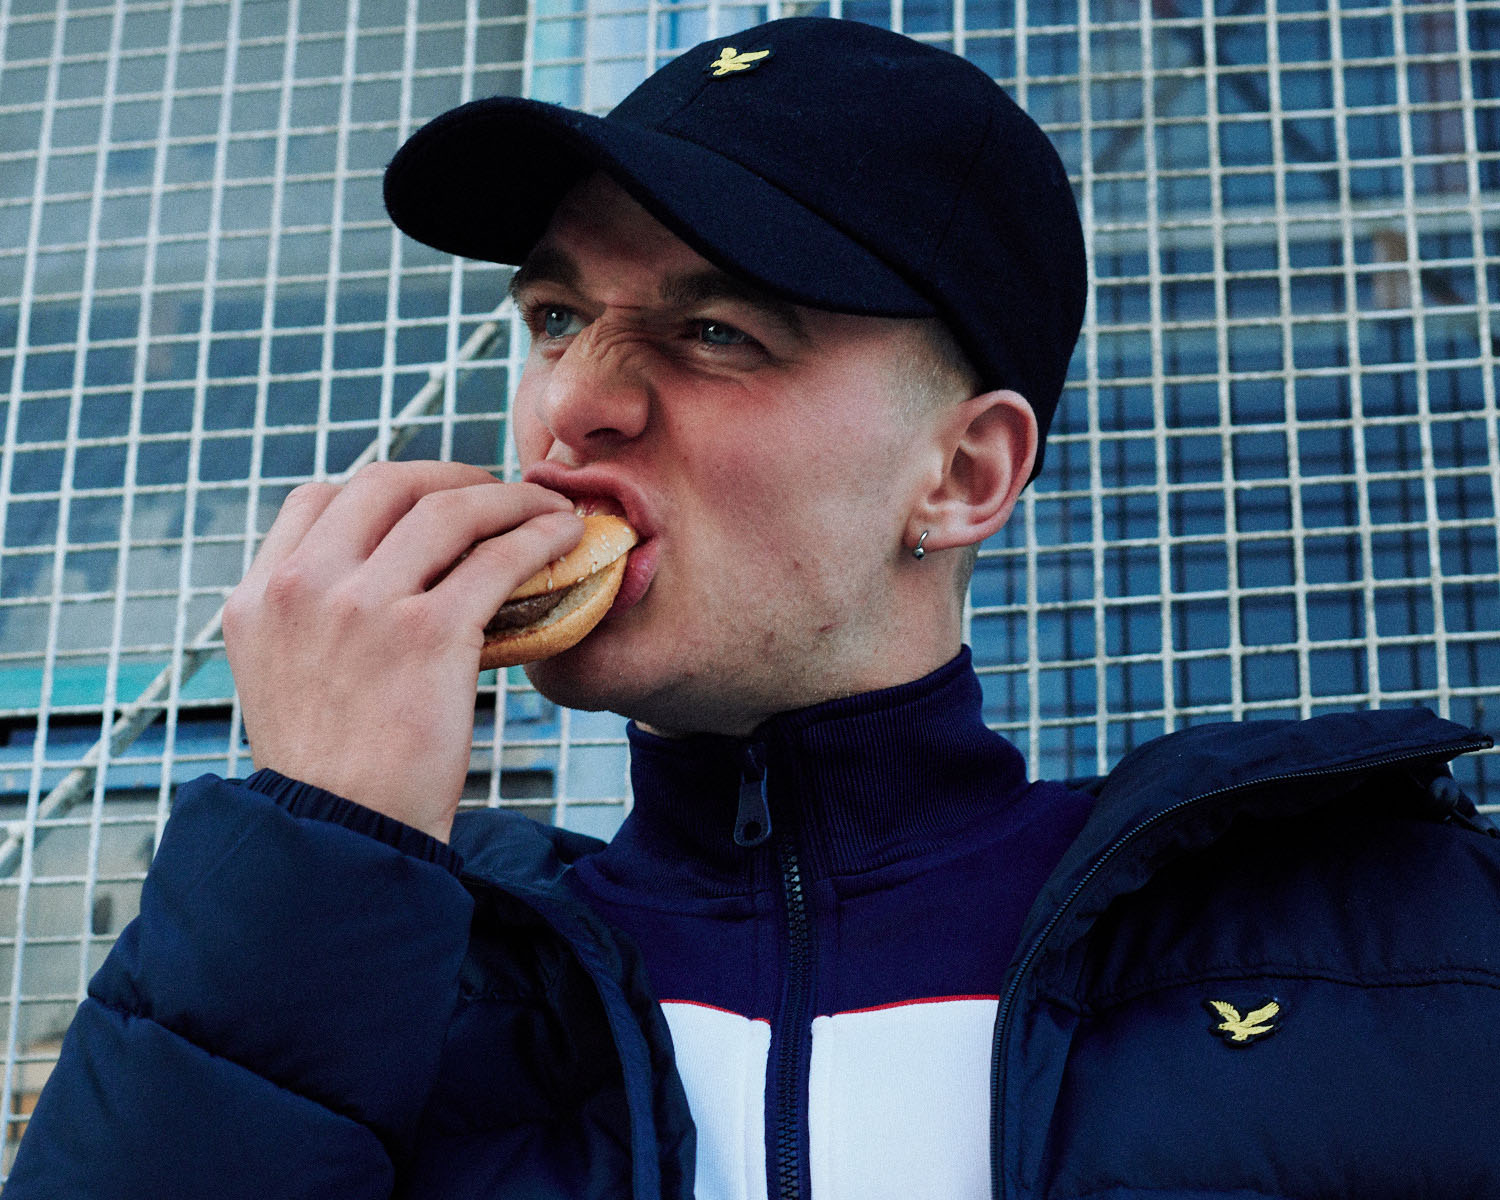 Lad in, eats burger by lifestyle photographer Tim Cole